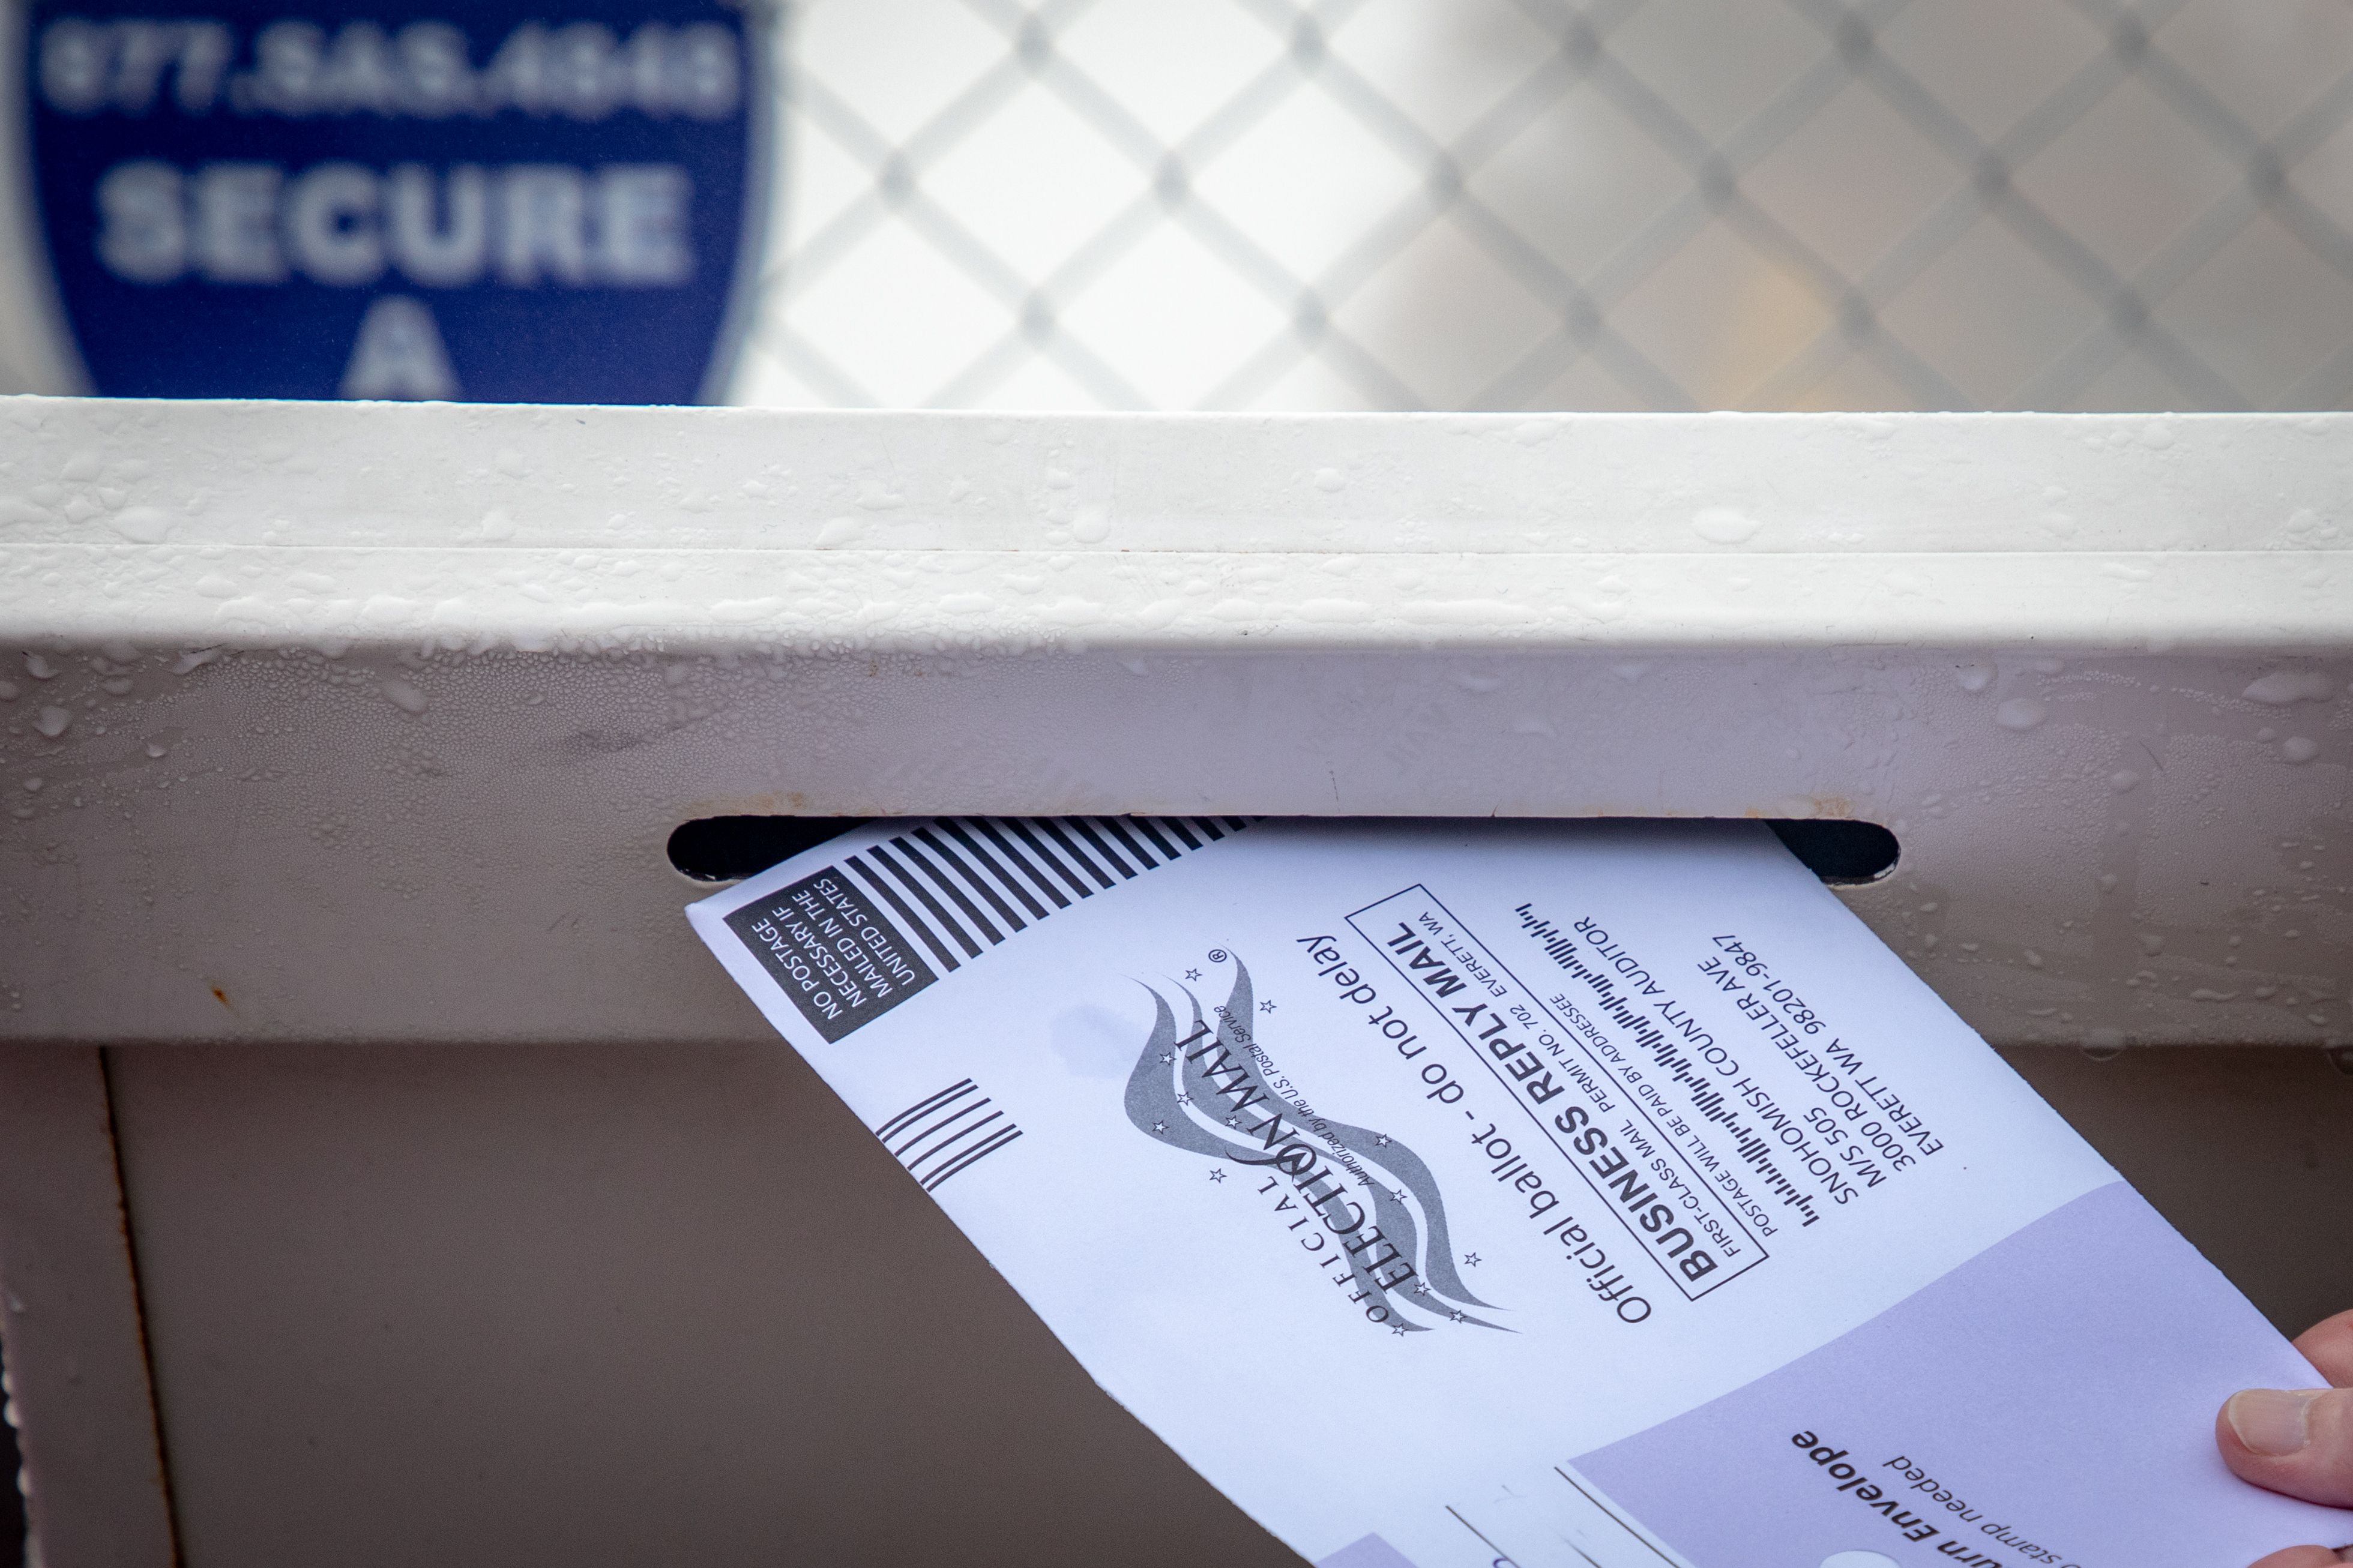 A mail-in ballot. Image by CL Shebley / Shutterstock. United States, 2018.